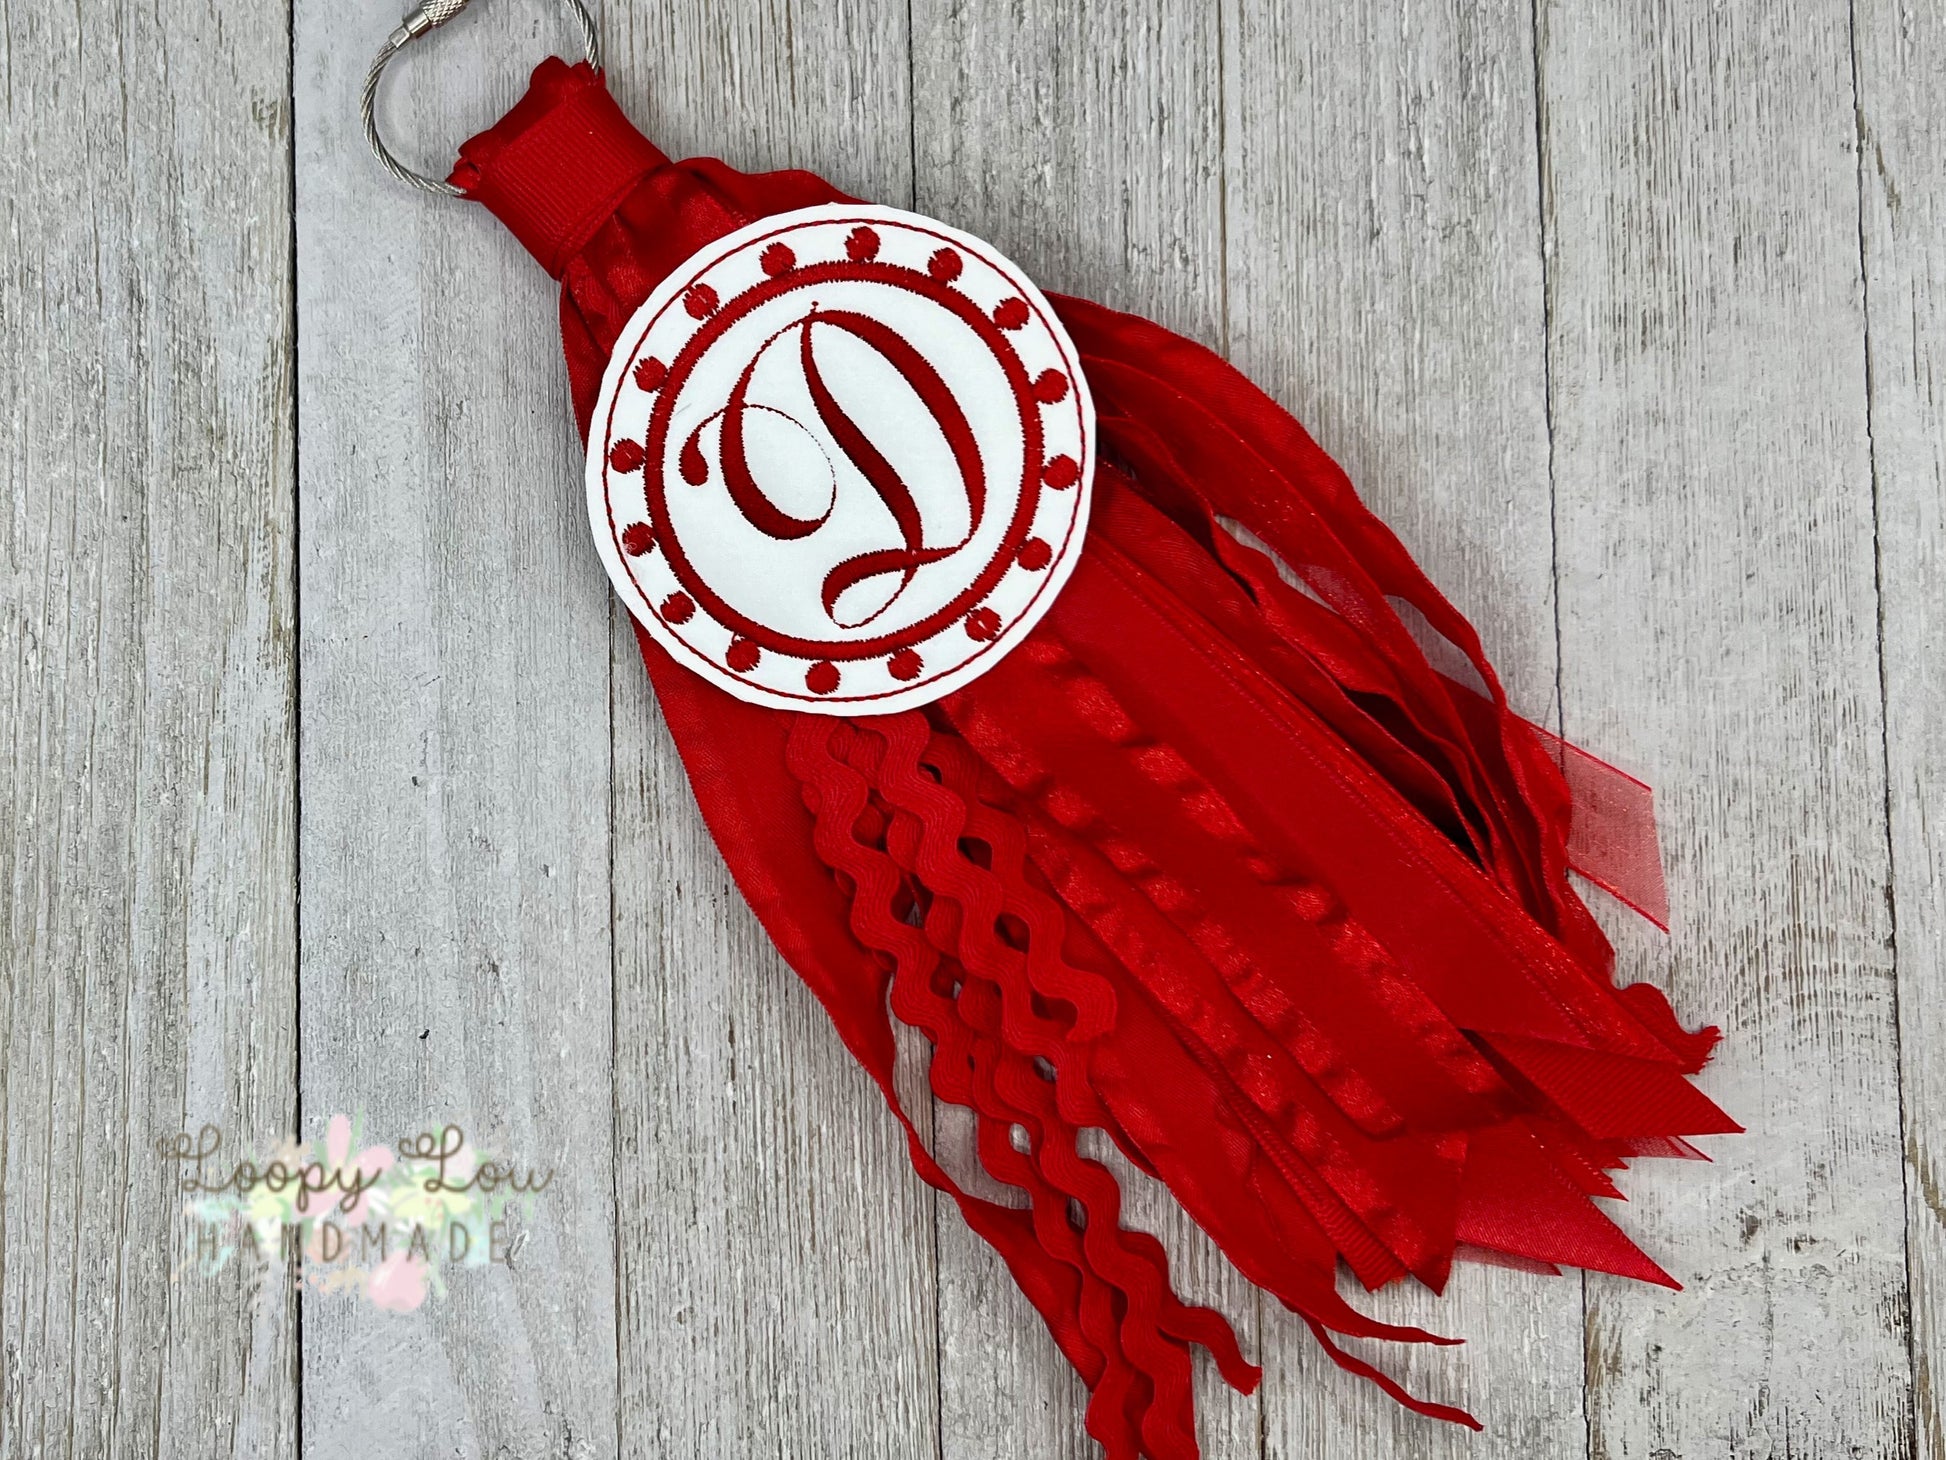 Red and White Monogram Ribbon Tassel Keychain, Bogg Bag Accessory